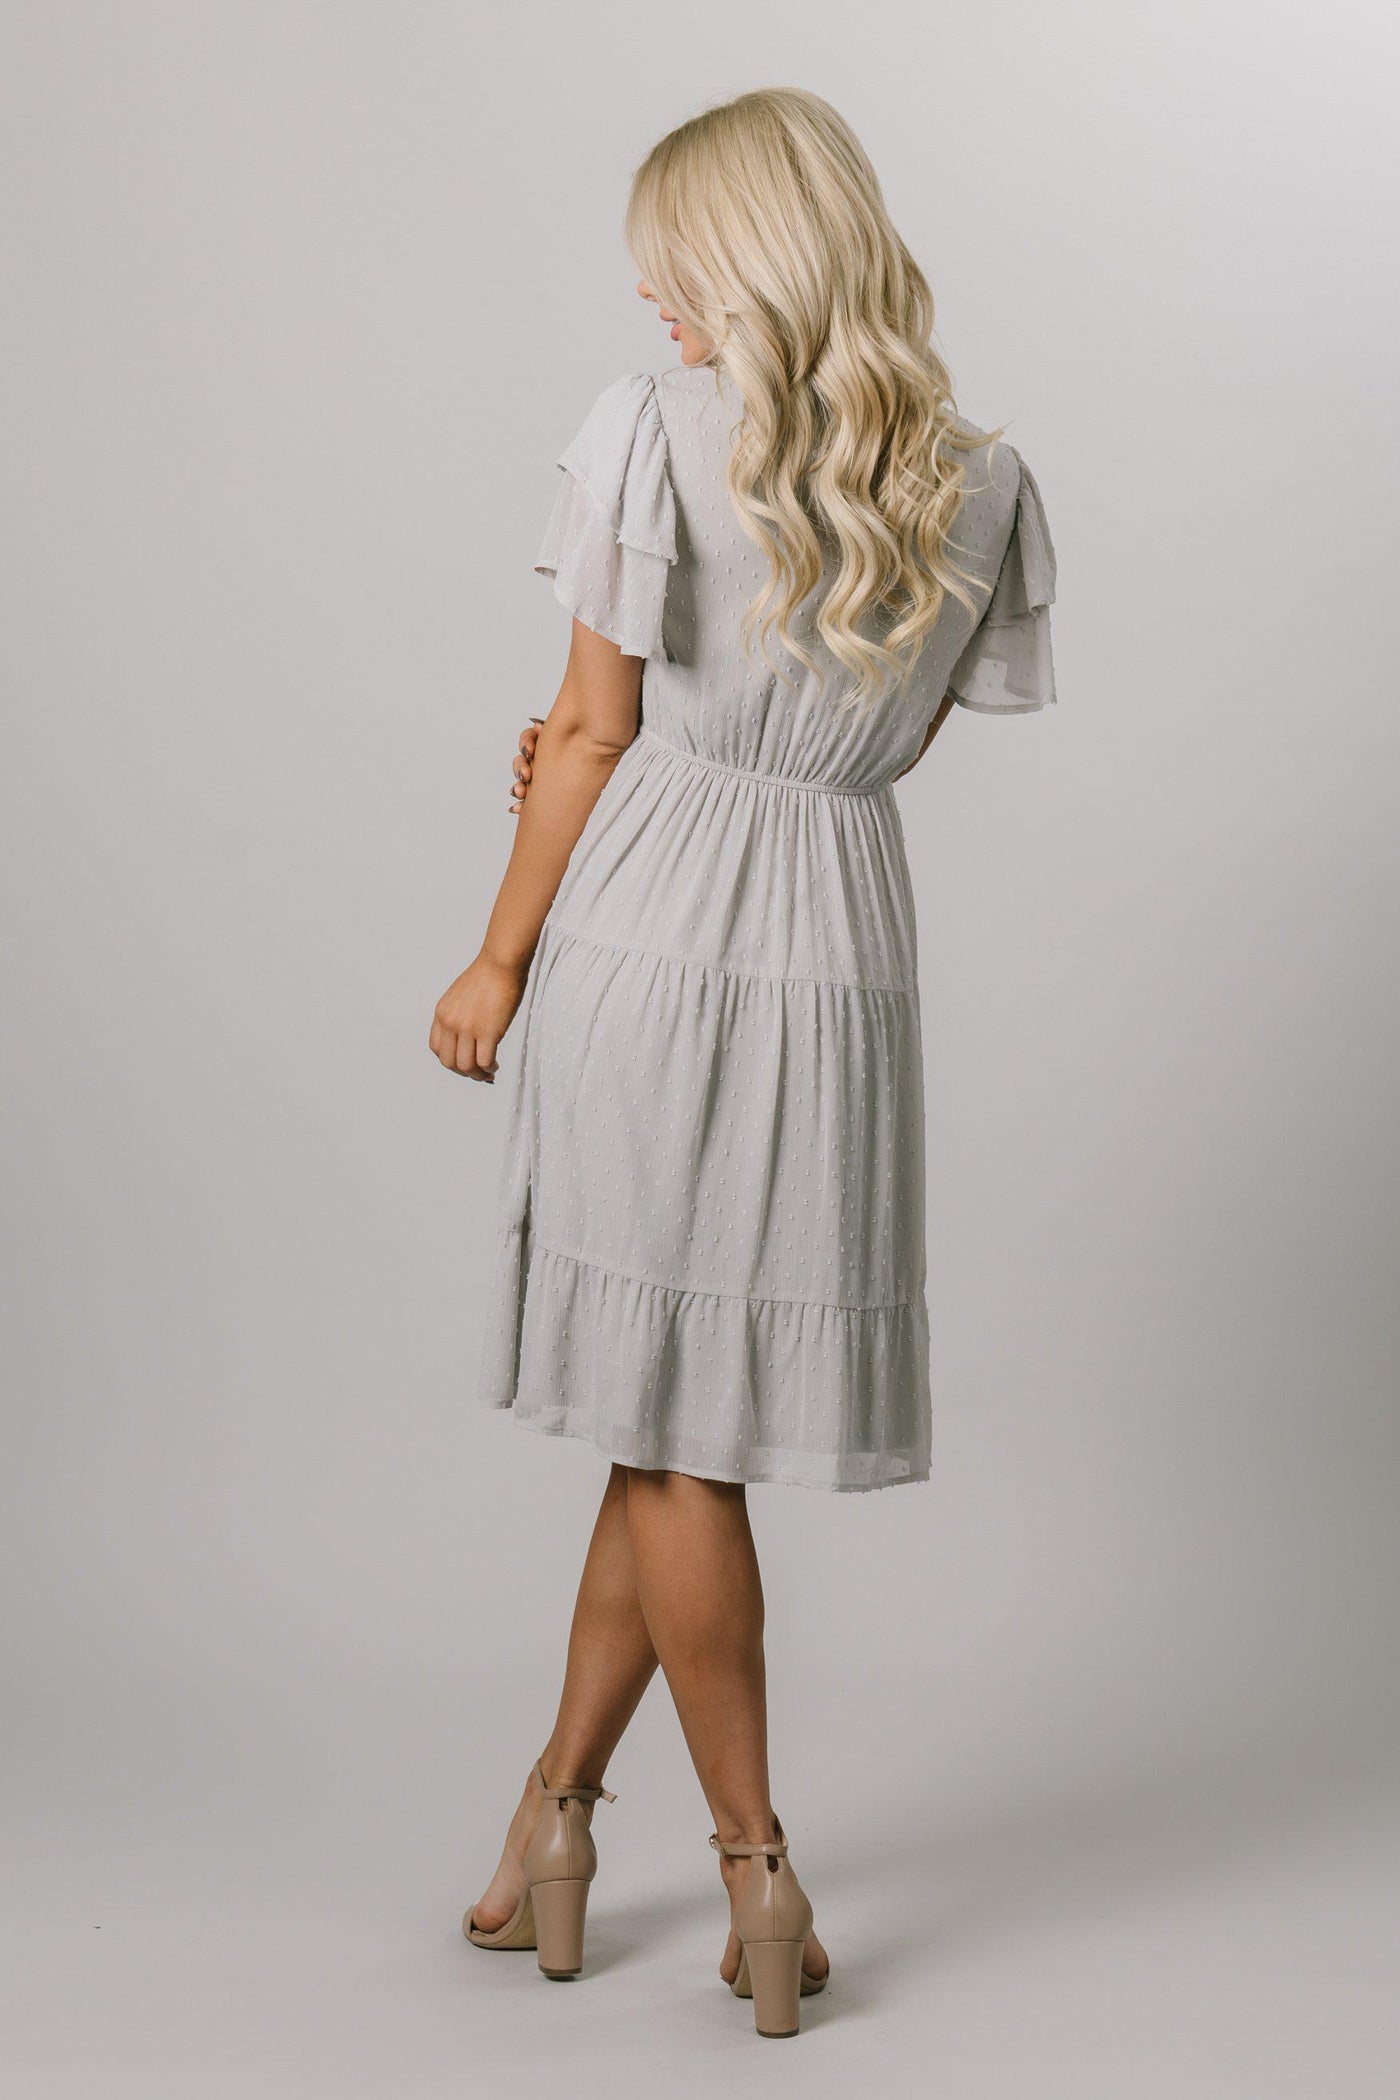 Modest Dresses - Modest Clothing - Everyday Modest Dresses - Bridesmaid Modest Dresses. The back of the knee length dress with three panels. The sleeves have flutter sleeves with two tiers. 